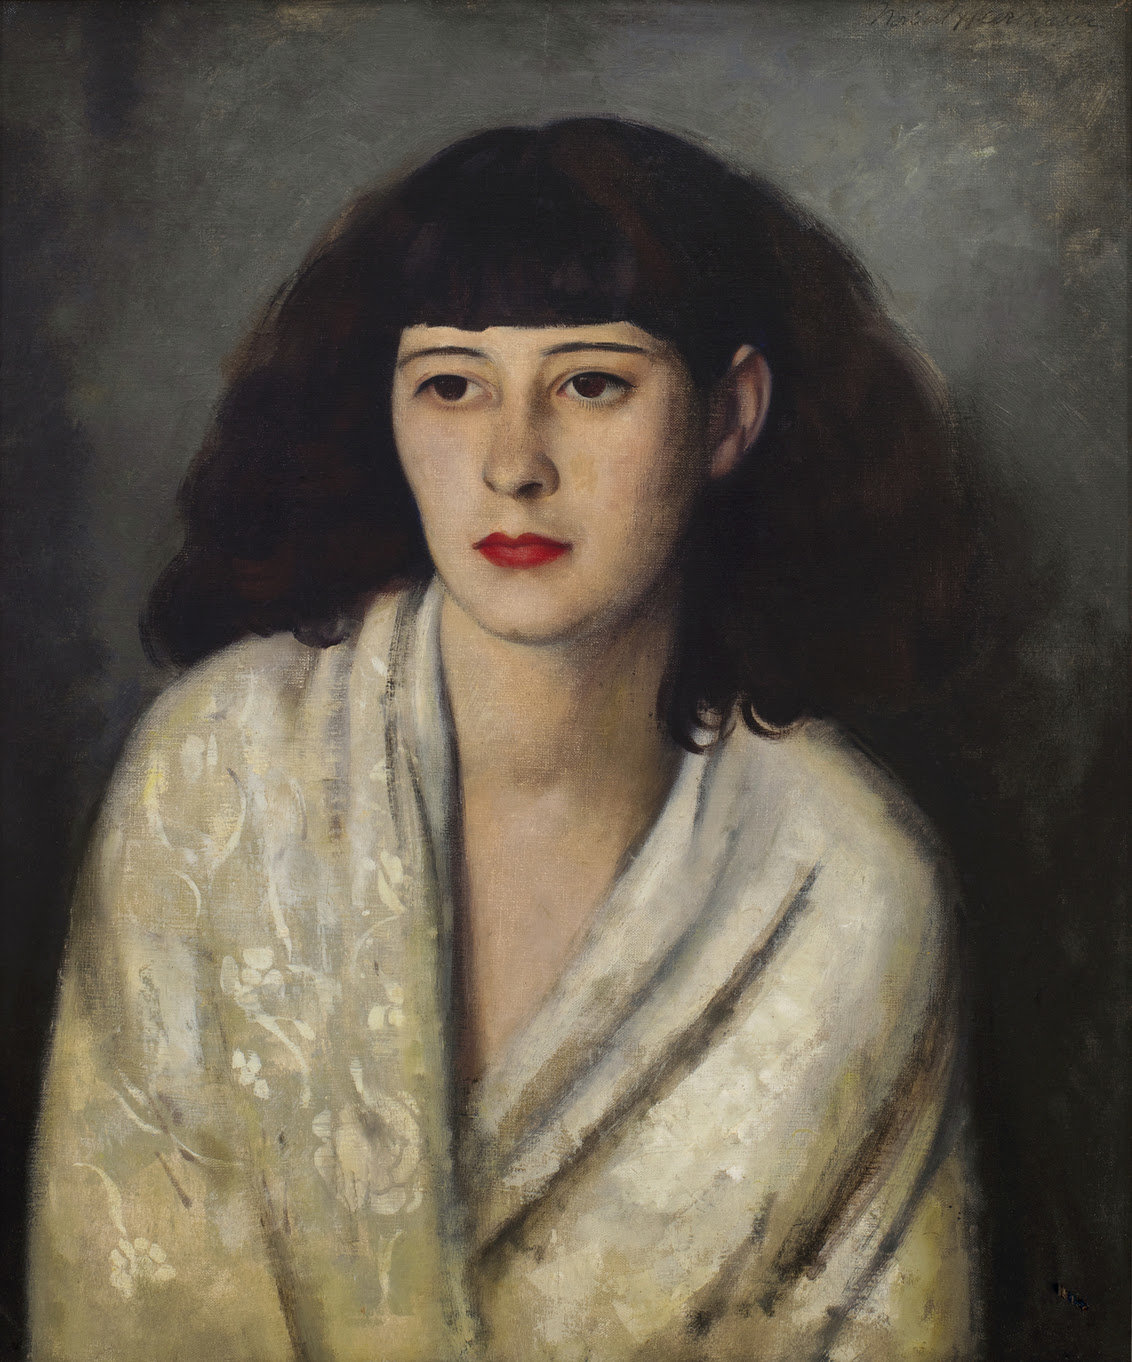 Norbert Heermann, Lady with Red Lips, n.d., courtesy of the New York State Museum, Historic Woodstock Art Colony: Arthur A. Anderson Collection 